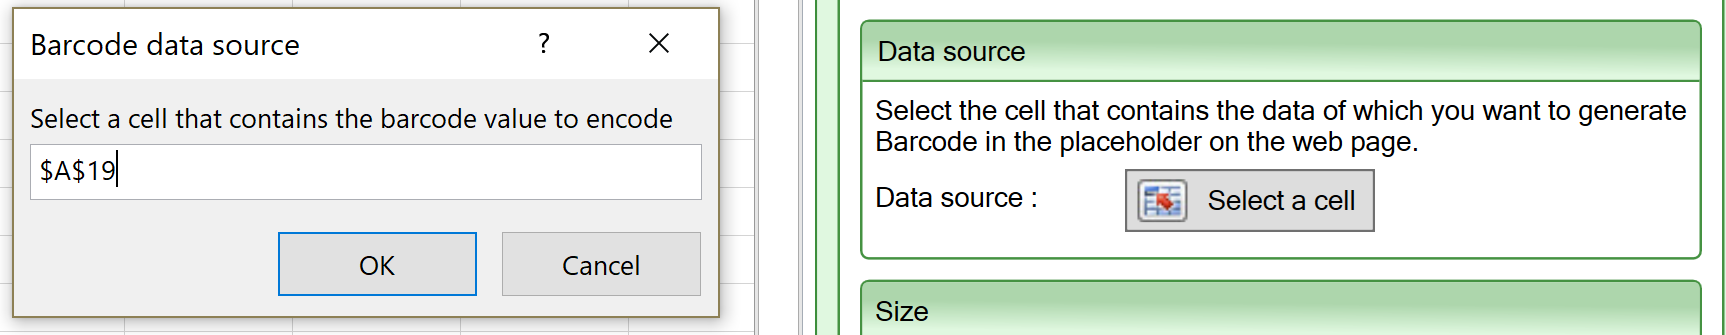 Screenshot of the Data source setting for the Barcode widget